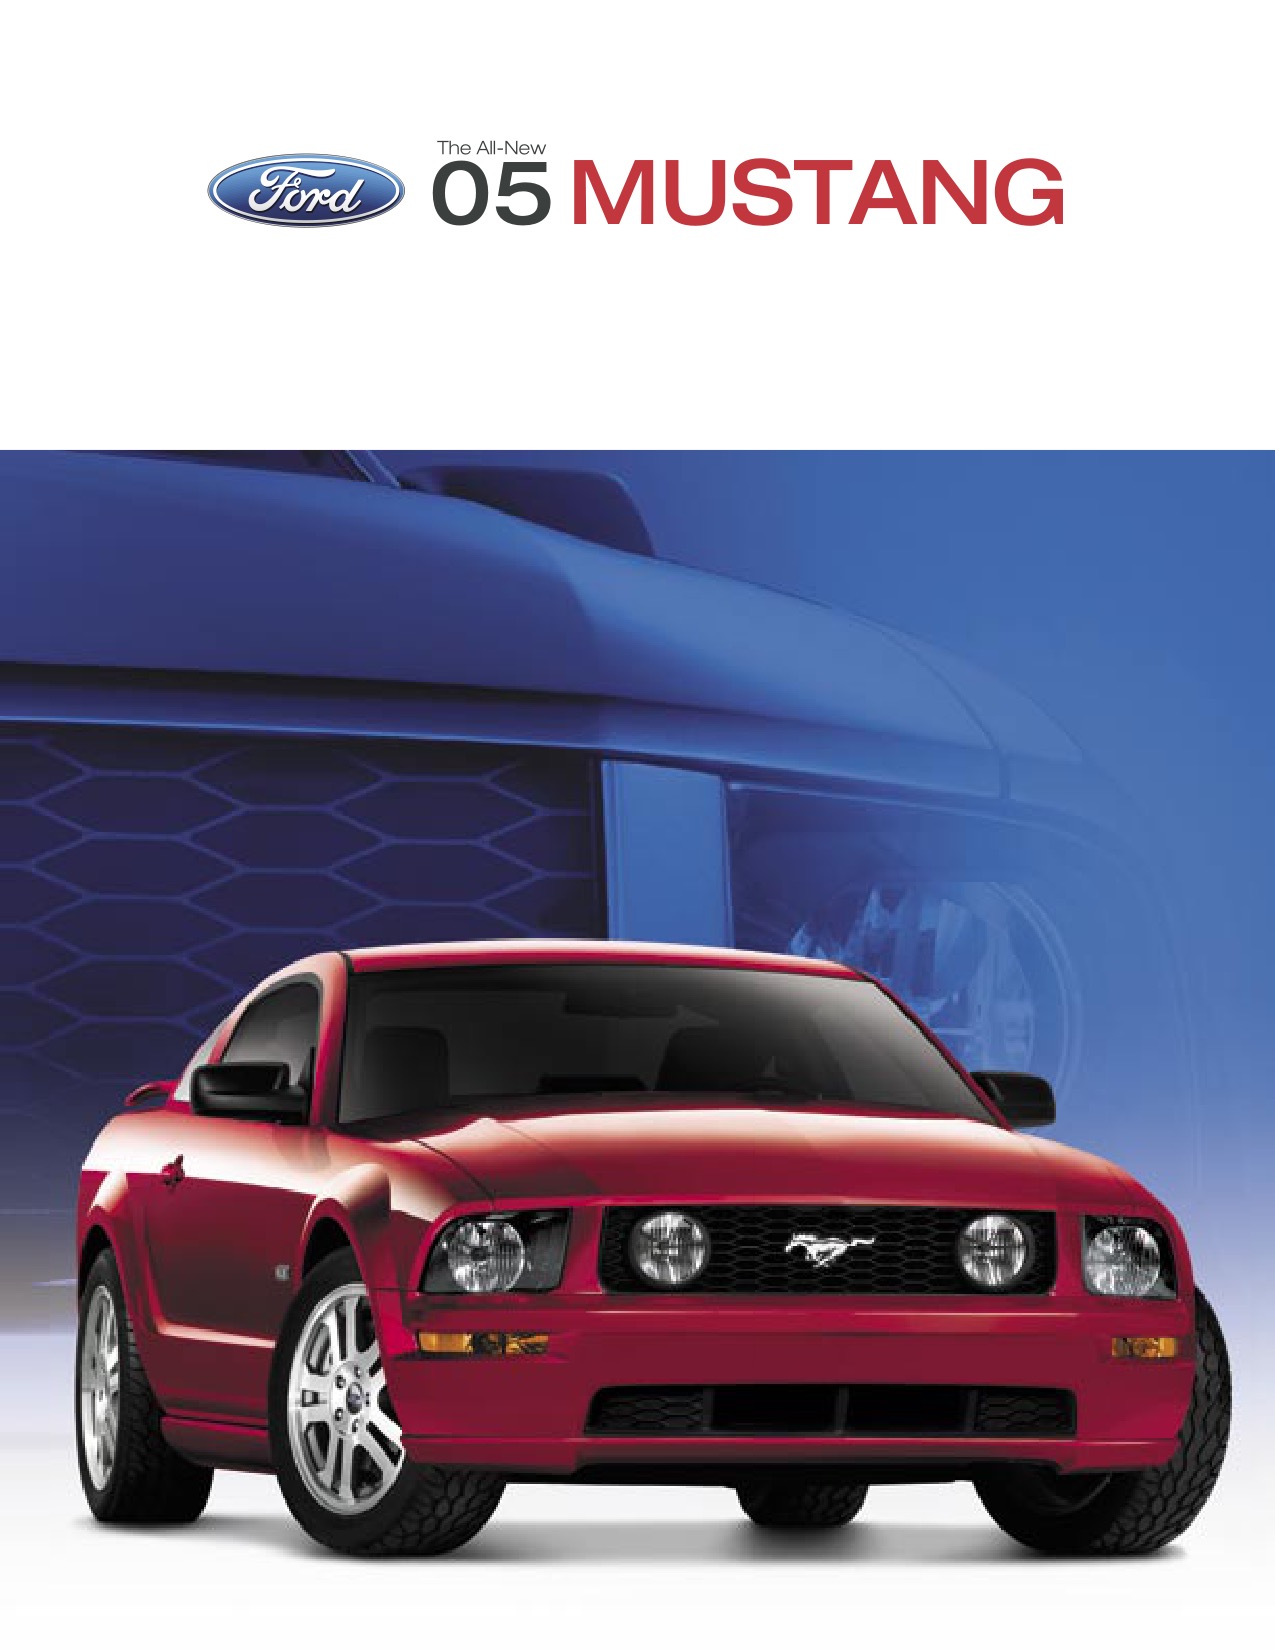 2005 Ford Mustang Brochure Page 2